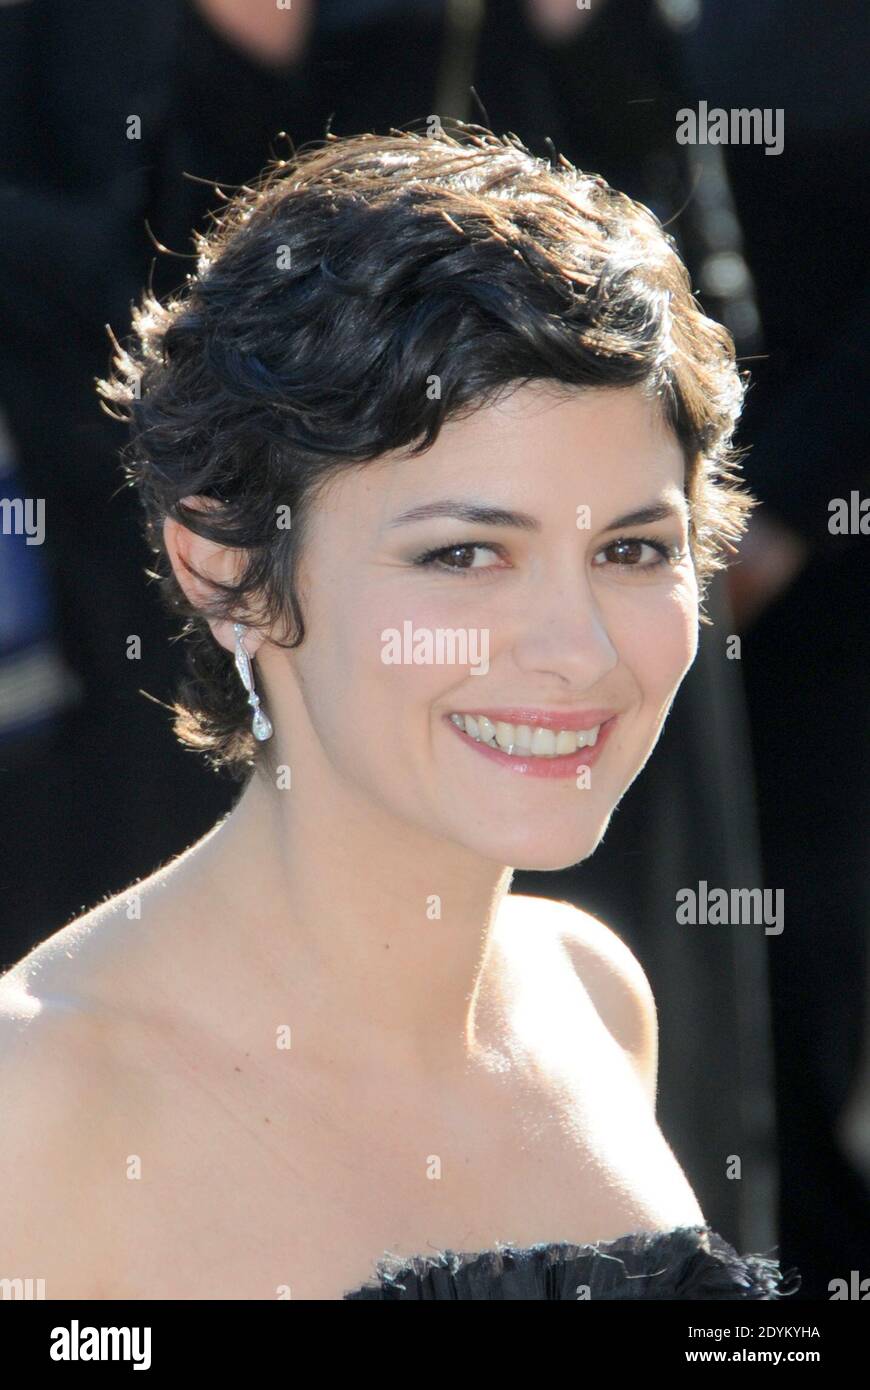 Audrey Tautou arriving for La Venus A La Fourrure screening held at the Palais Des Festivals in Cannes, France on May 25, 2013, as part of the 66th Cannes Film Festival. Photo by Elodie Lucot/ABACAPRESS.COM Stock Photo